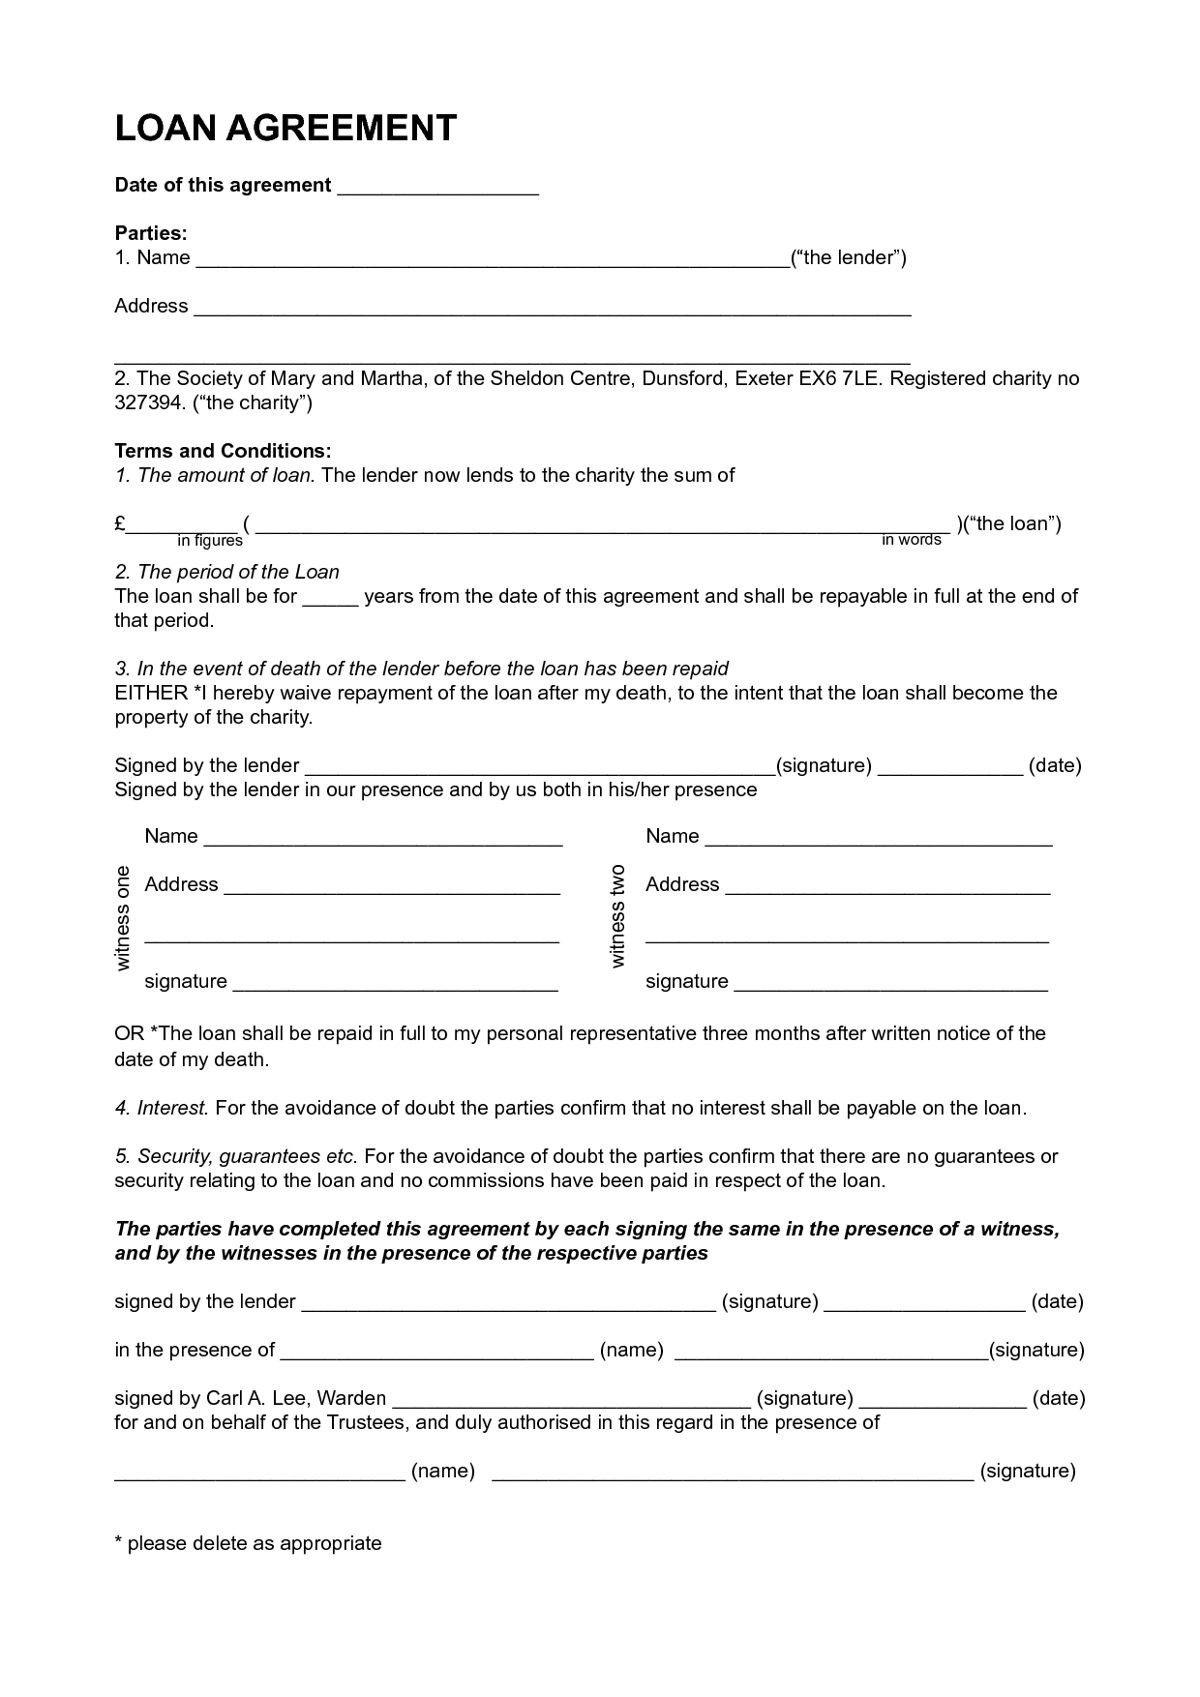 Personal Loan Agreement Template Between Friends Exceptional with regard to Private Loan Agreement Template Free